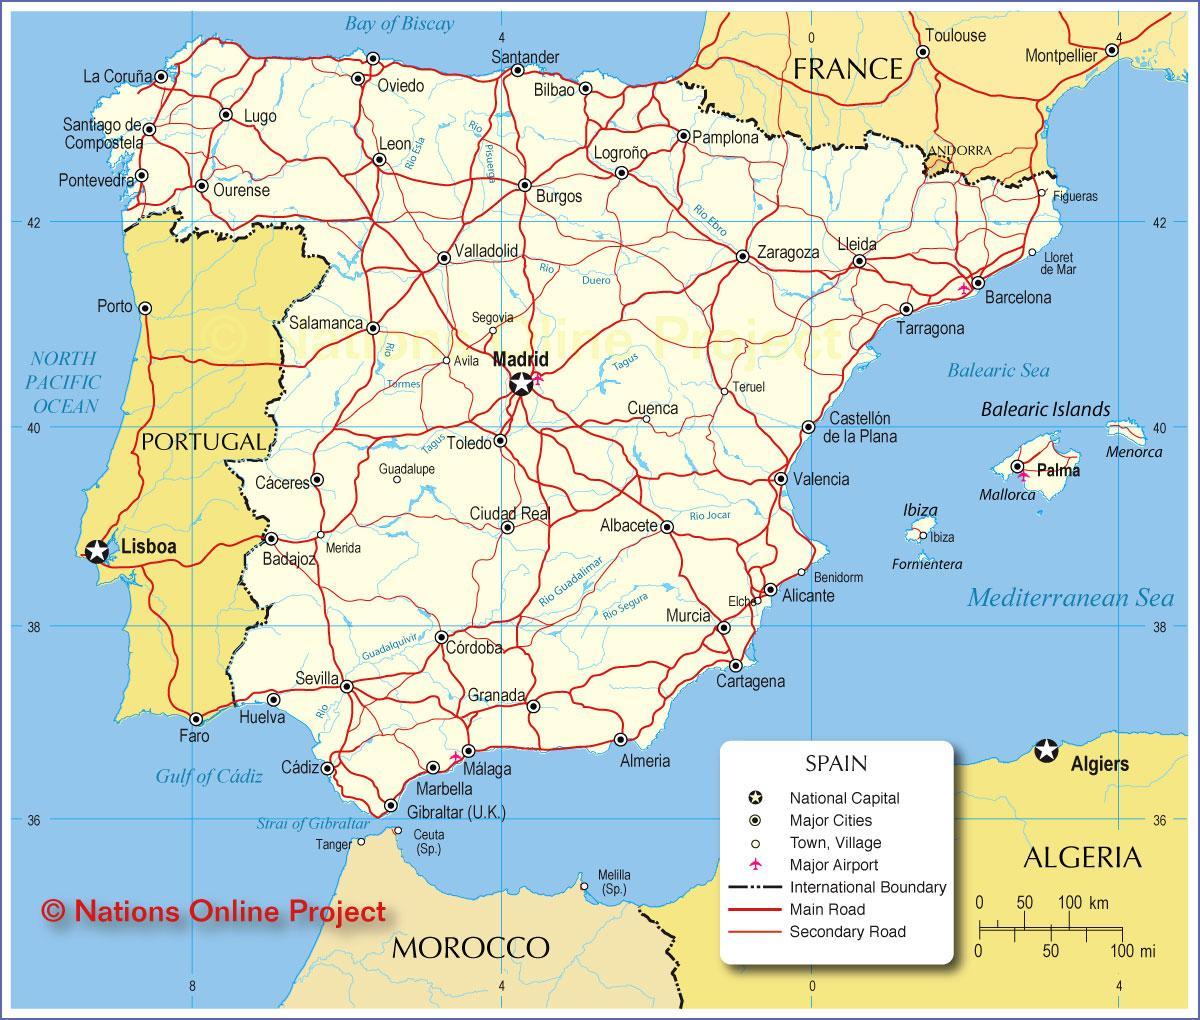 map of Spain transports